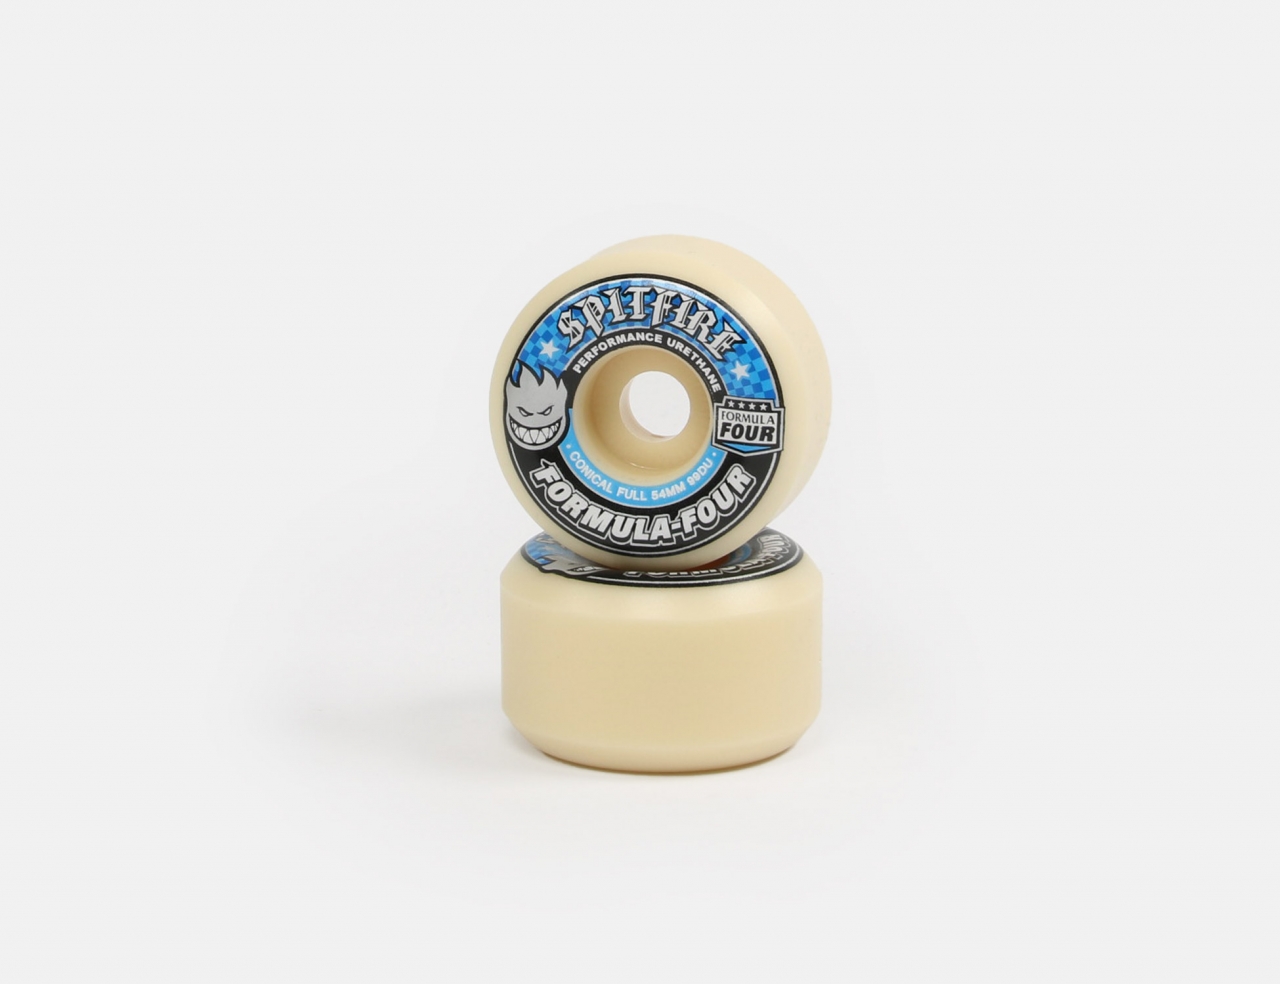 Spitfire F4 Conical Full 99A 54mm Wheels